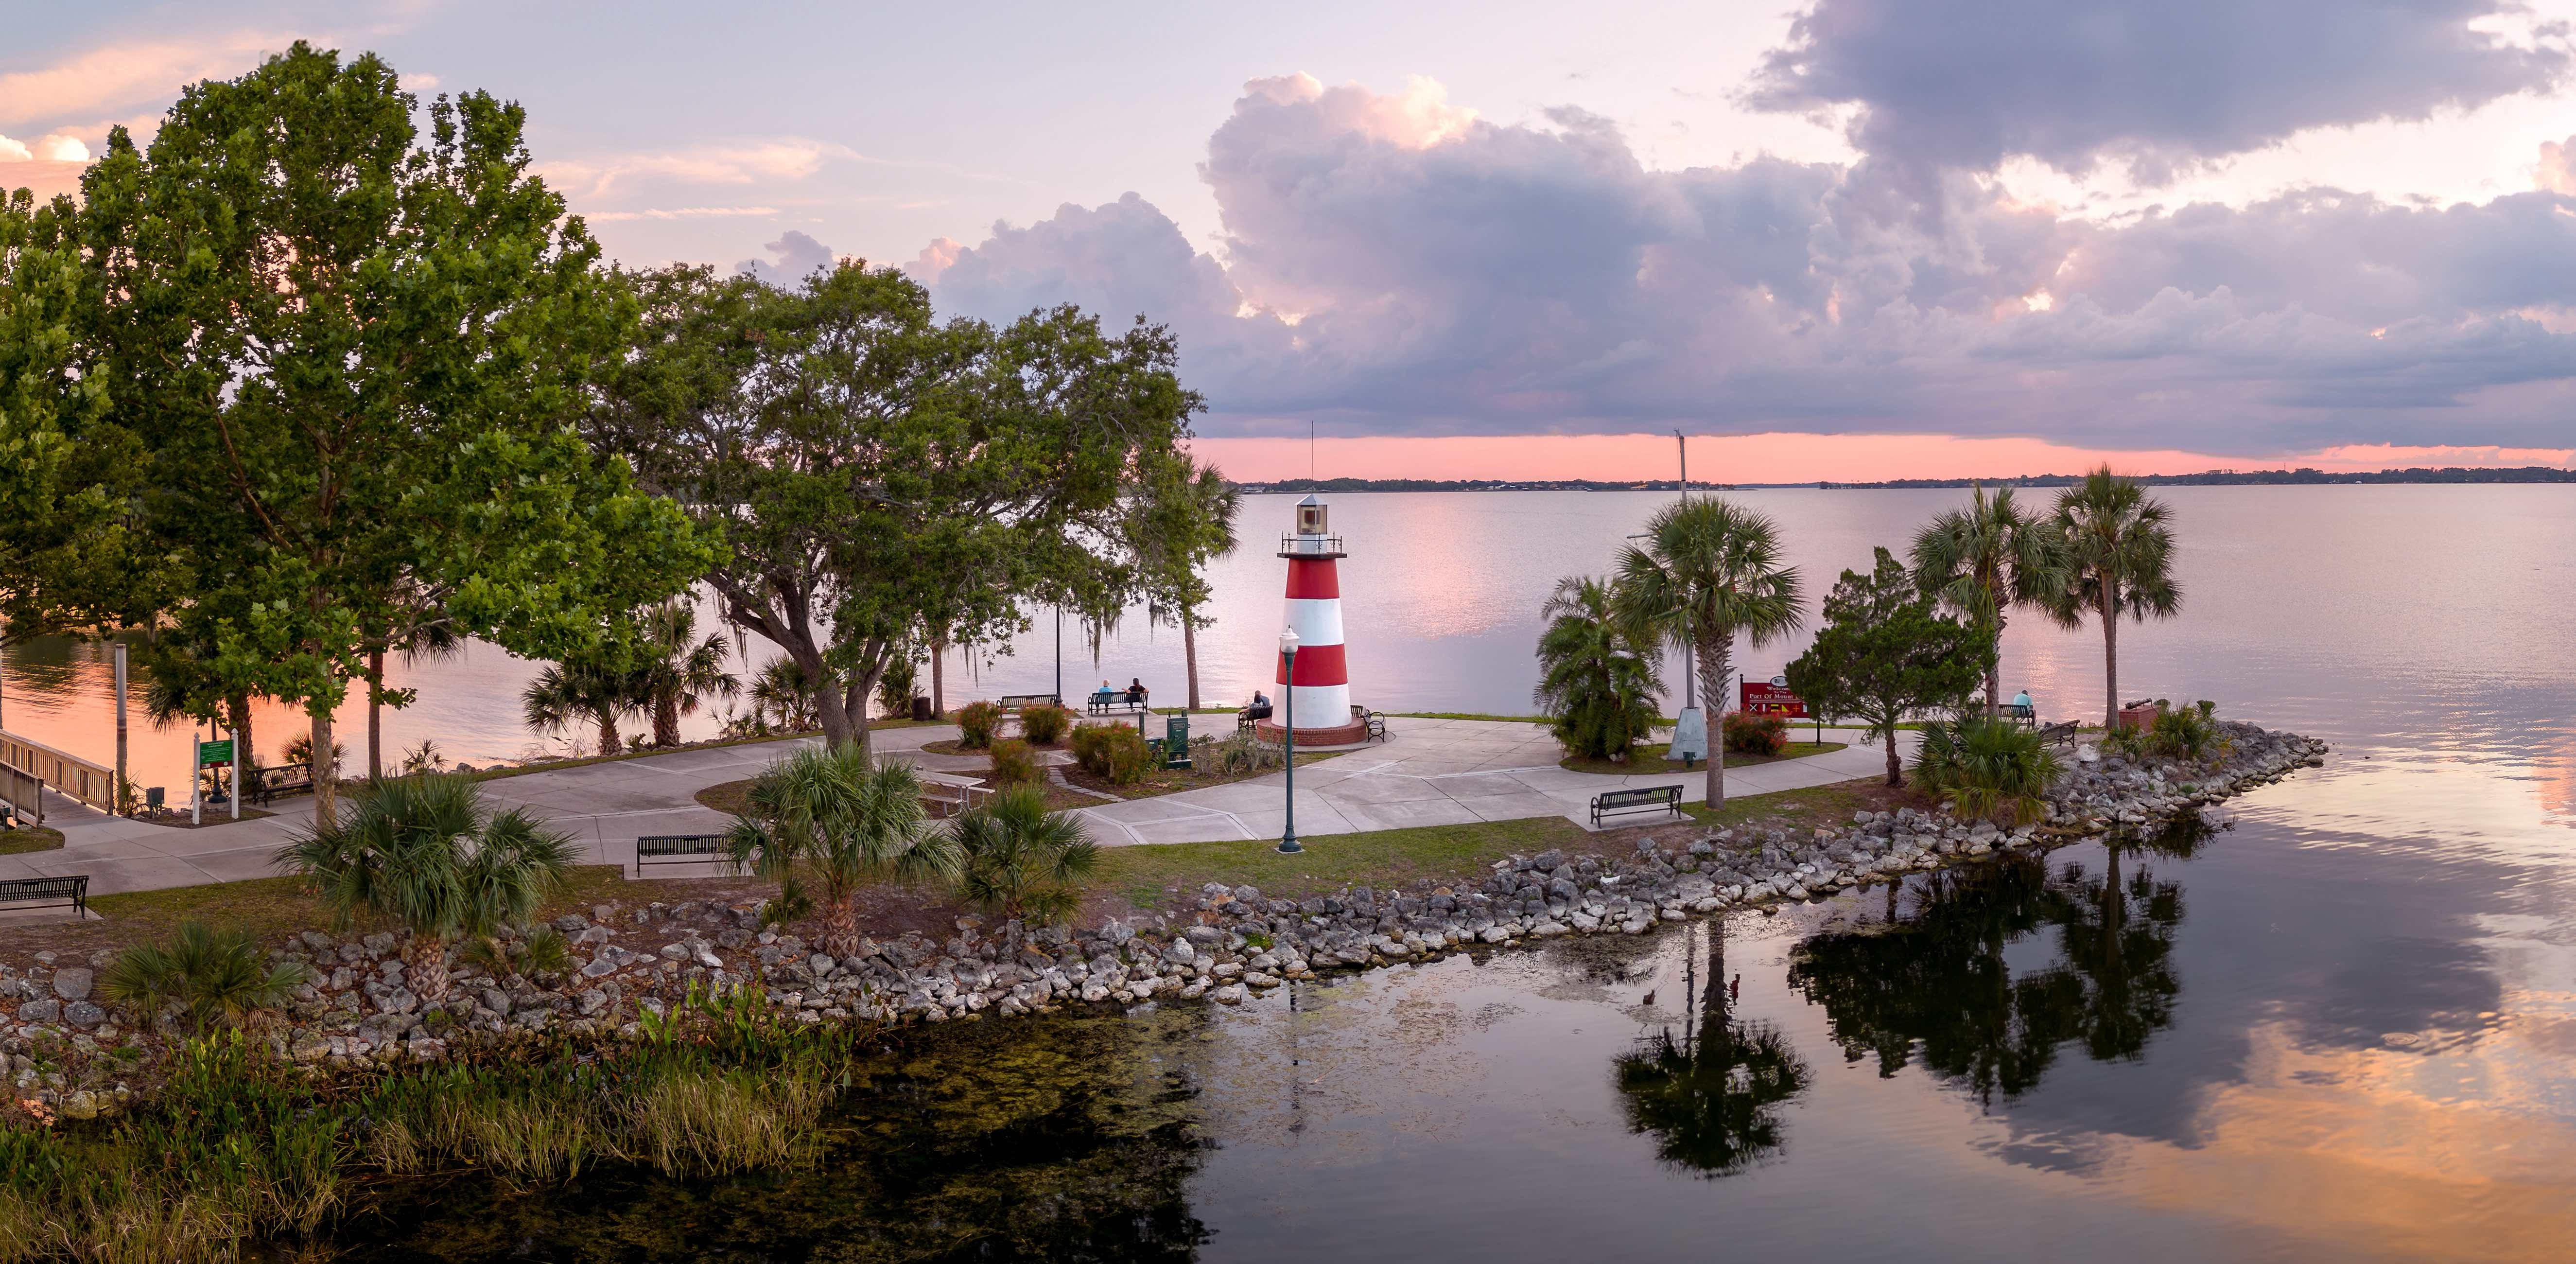 Mount Dora Lighthouse at sunset with palm trees